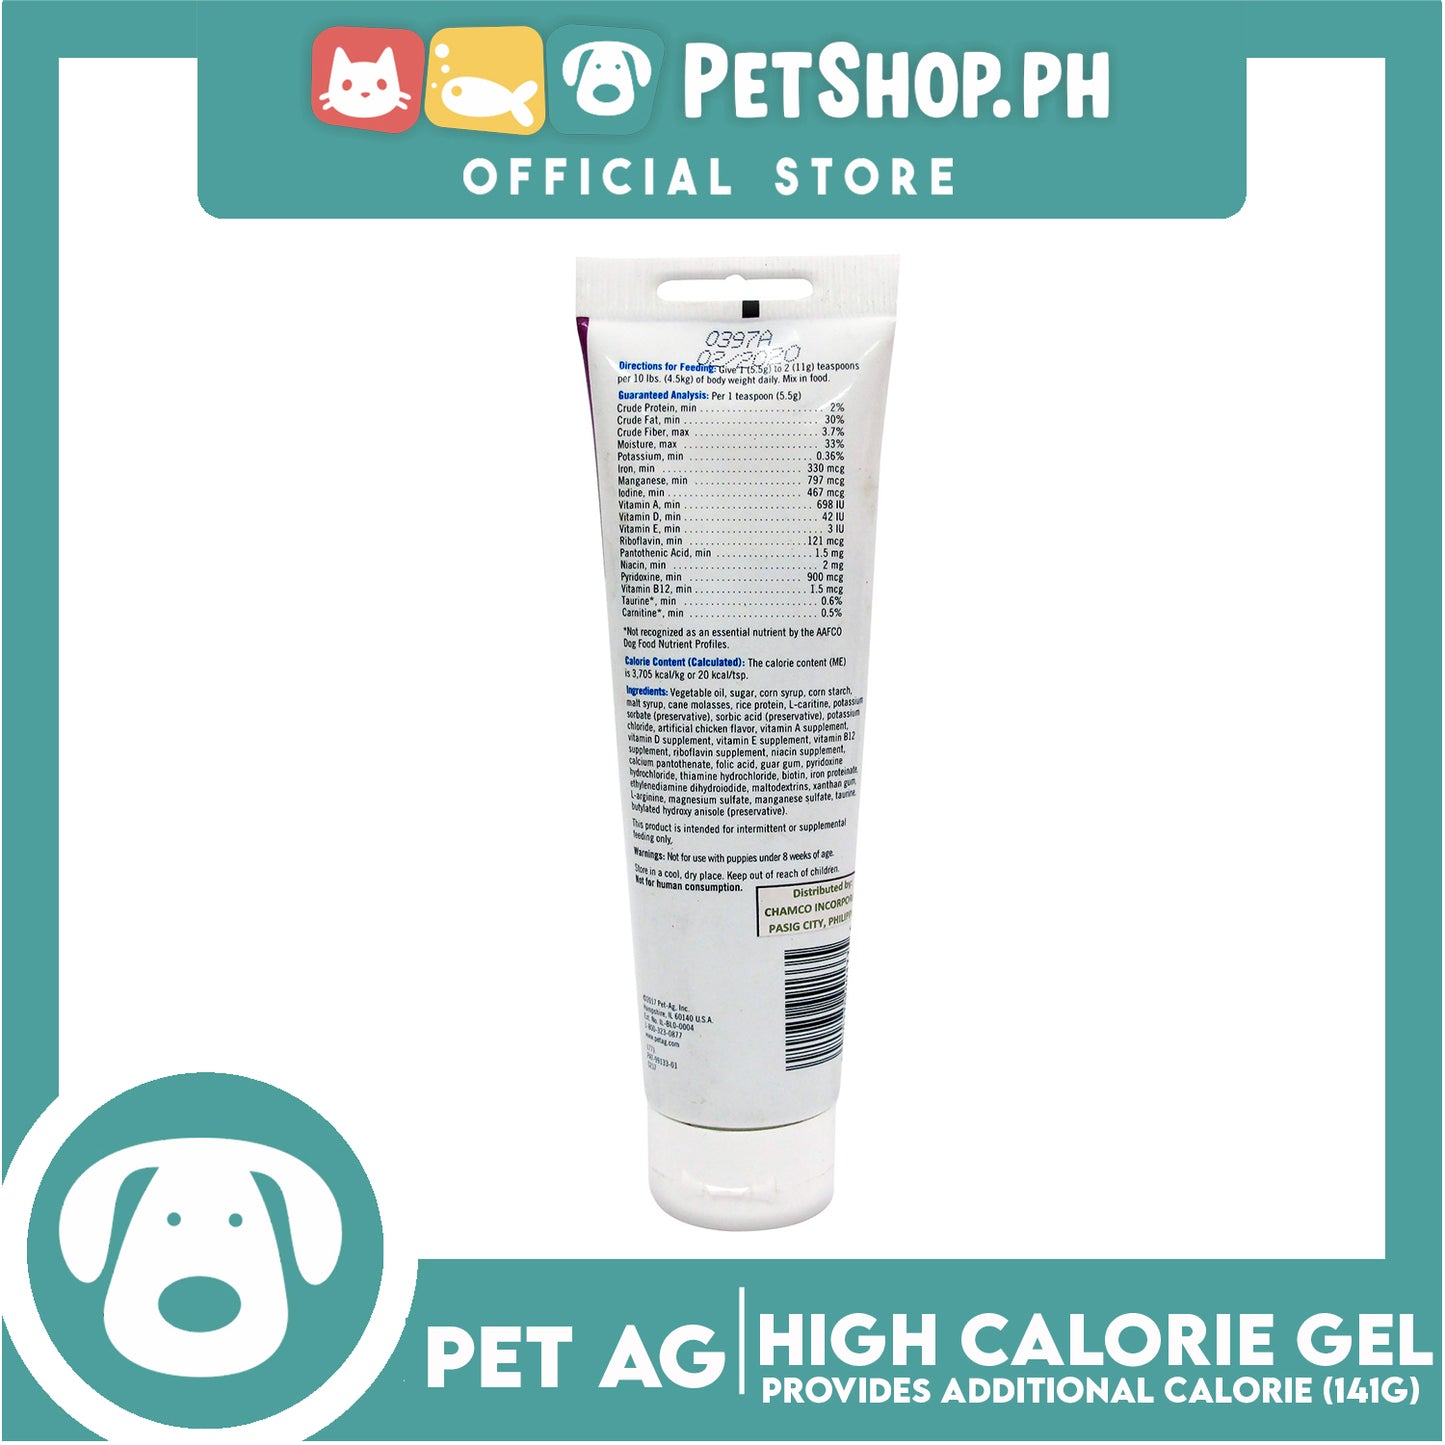 Pet Ag High Calorie Gel Supplement for Dogs 141g Provides Dogs 8 Weeks And Older